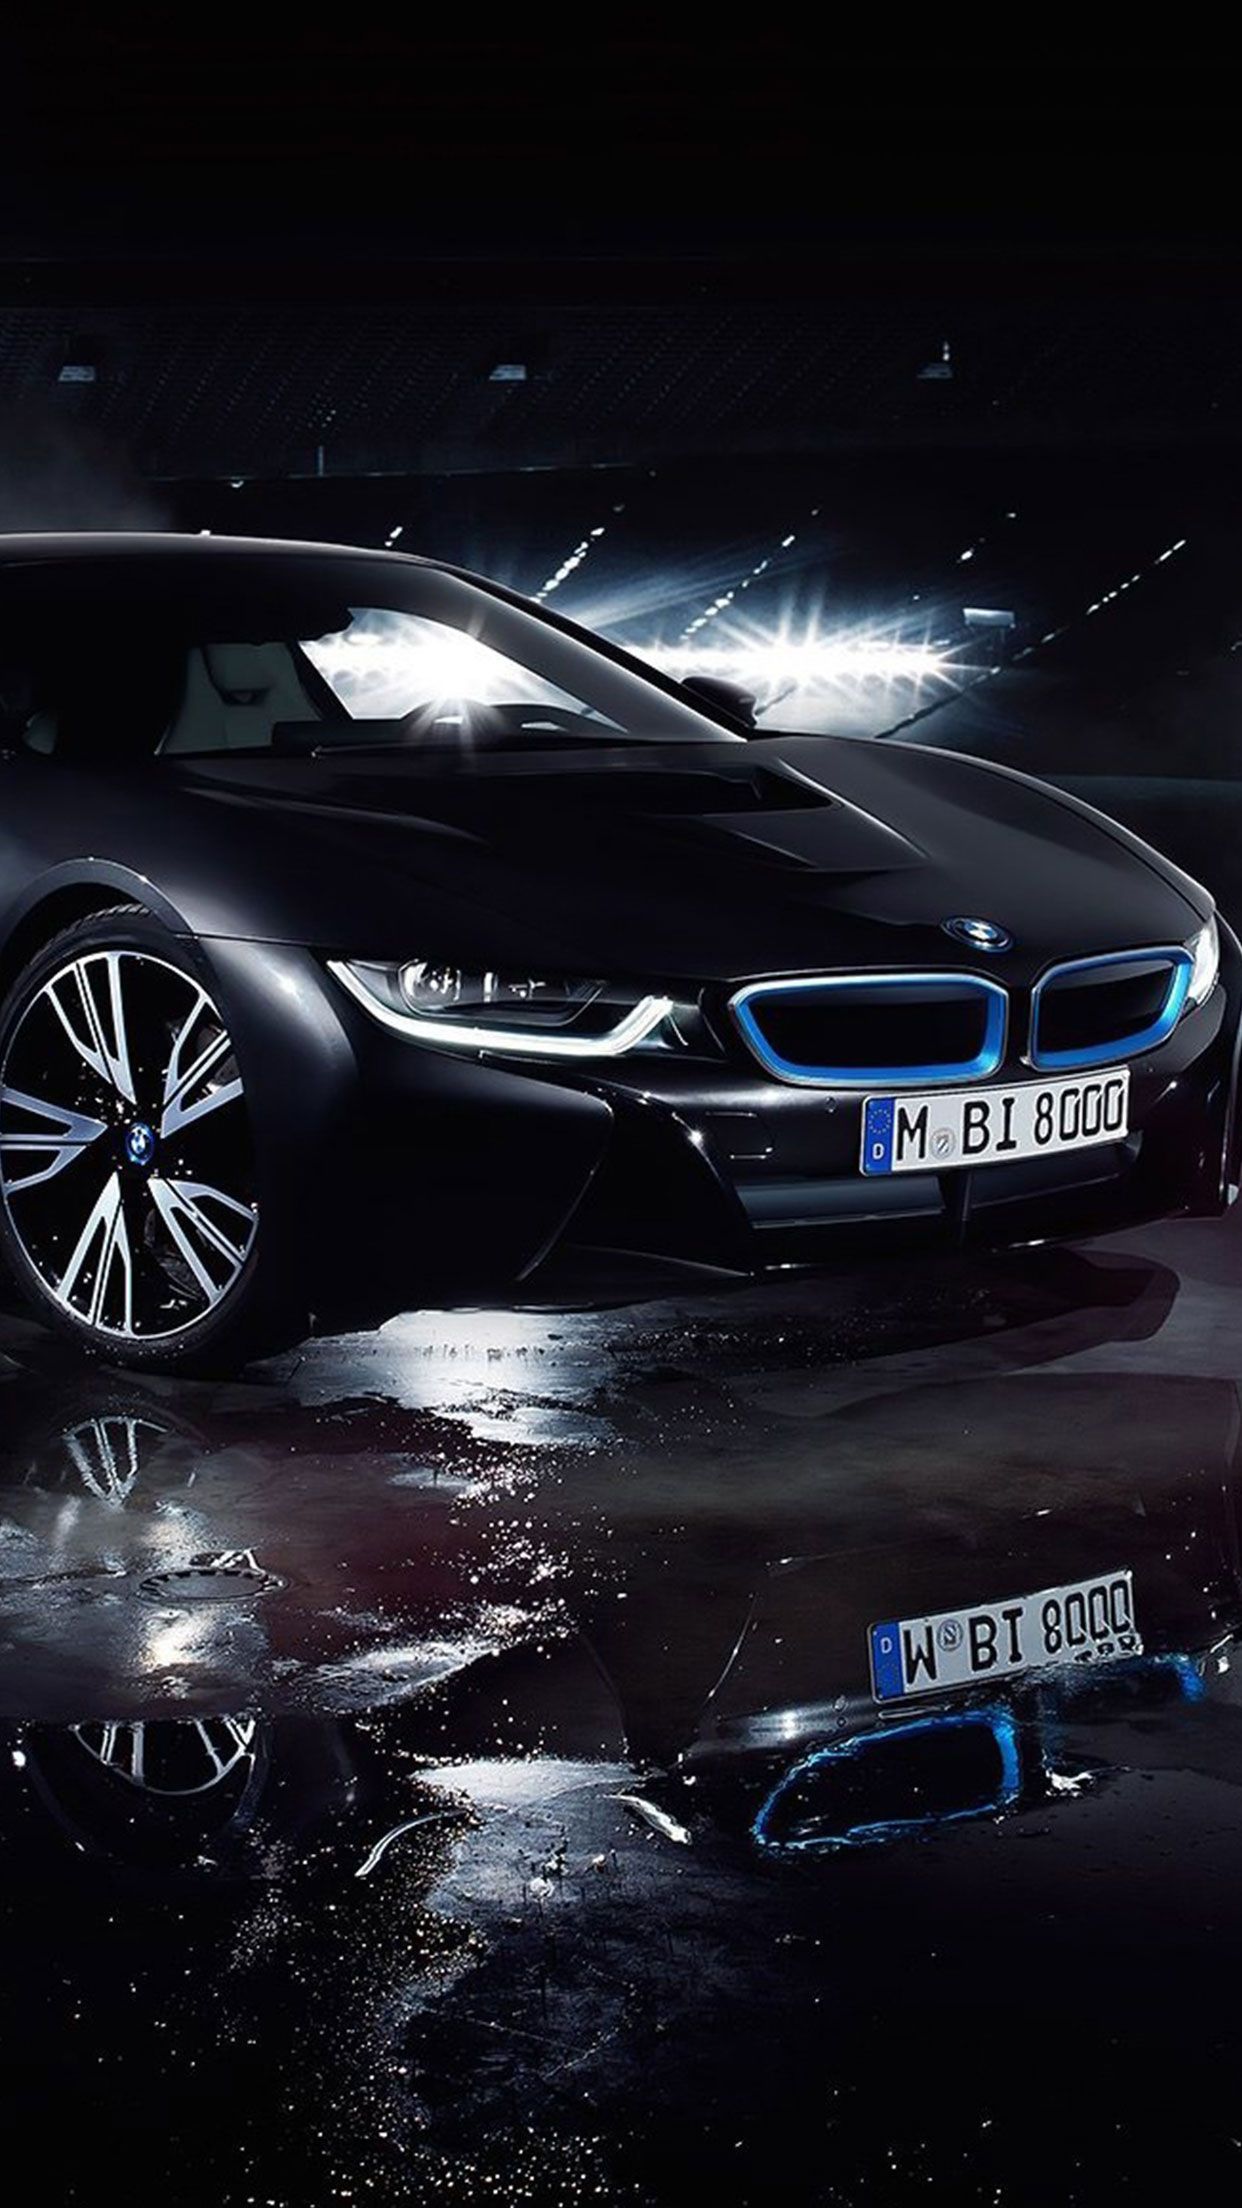 Black Bmw I8 Car Wallpaper For iPhone And Android